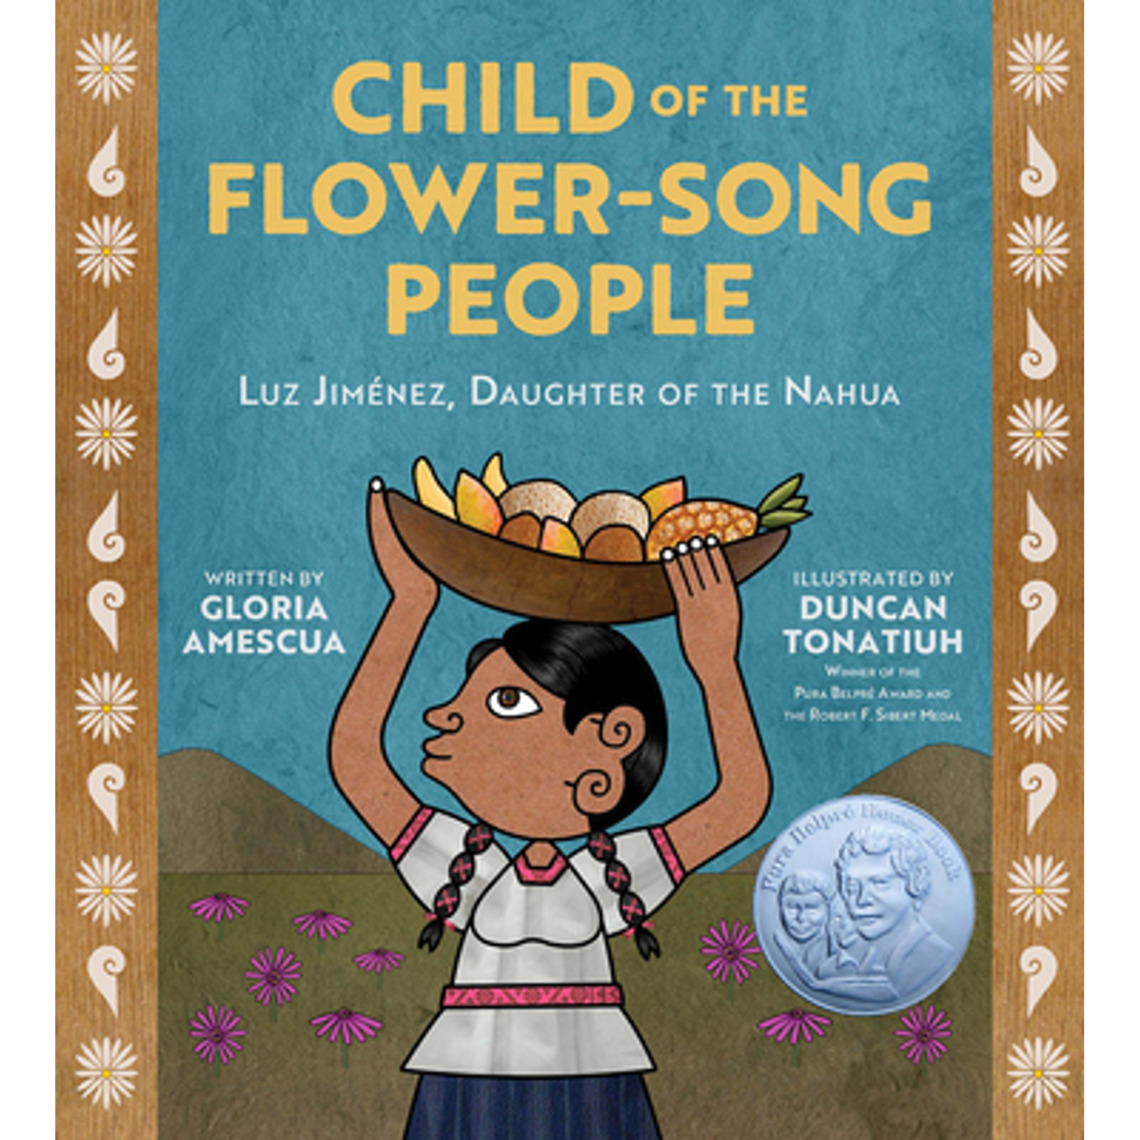 Book cover for "Child of the Flower Song People."